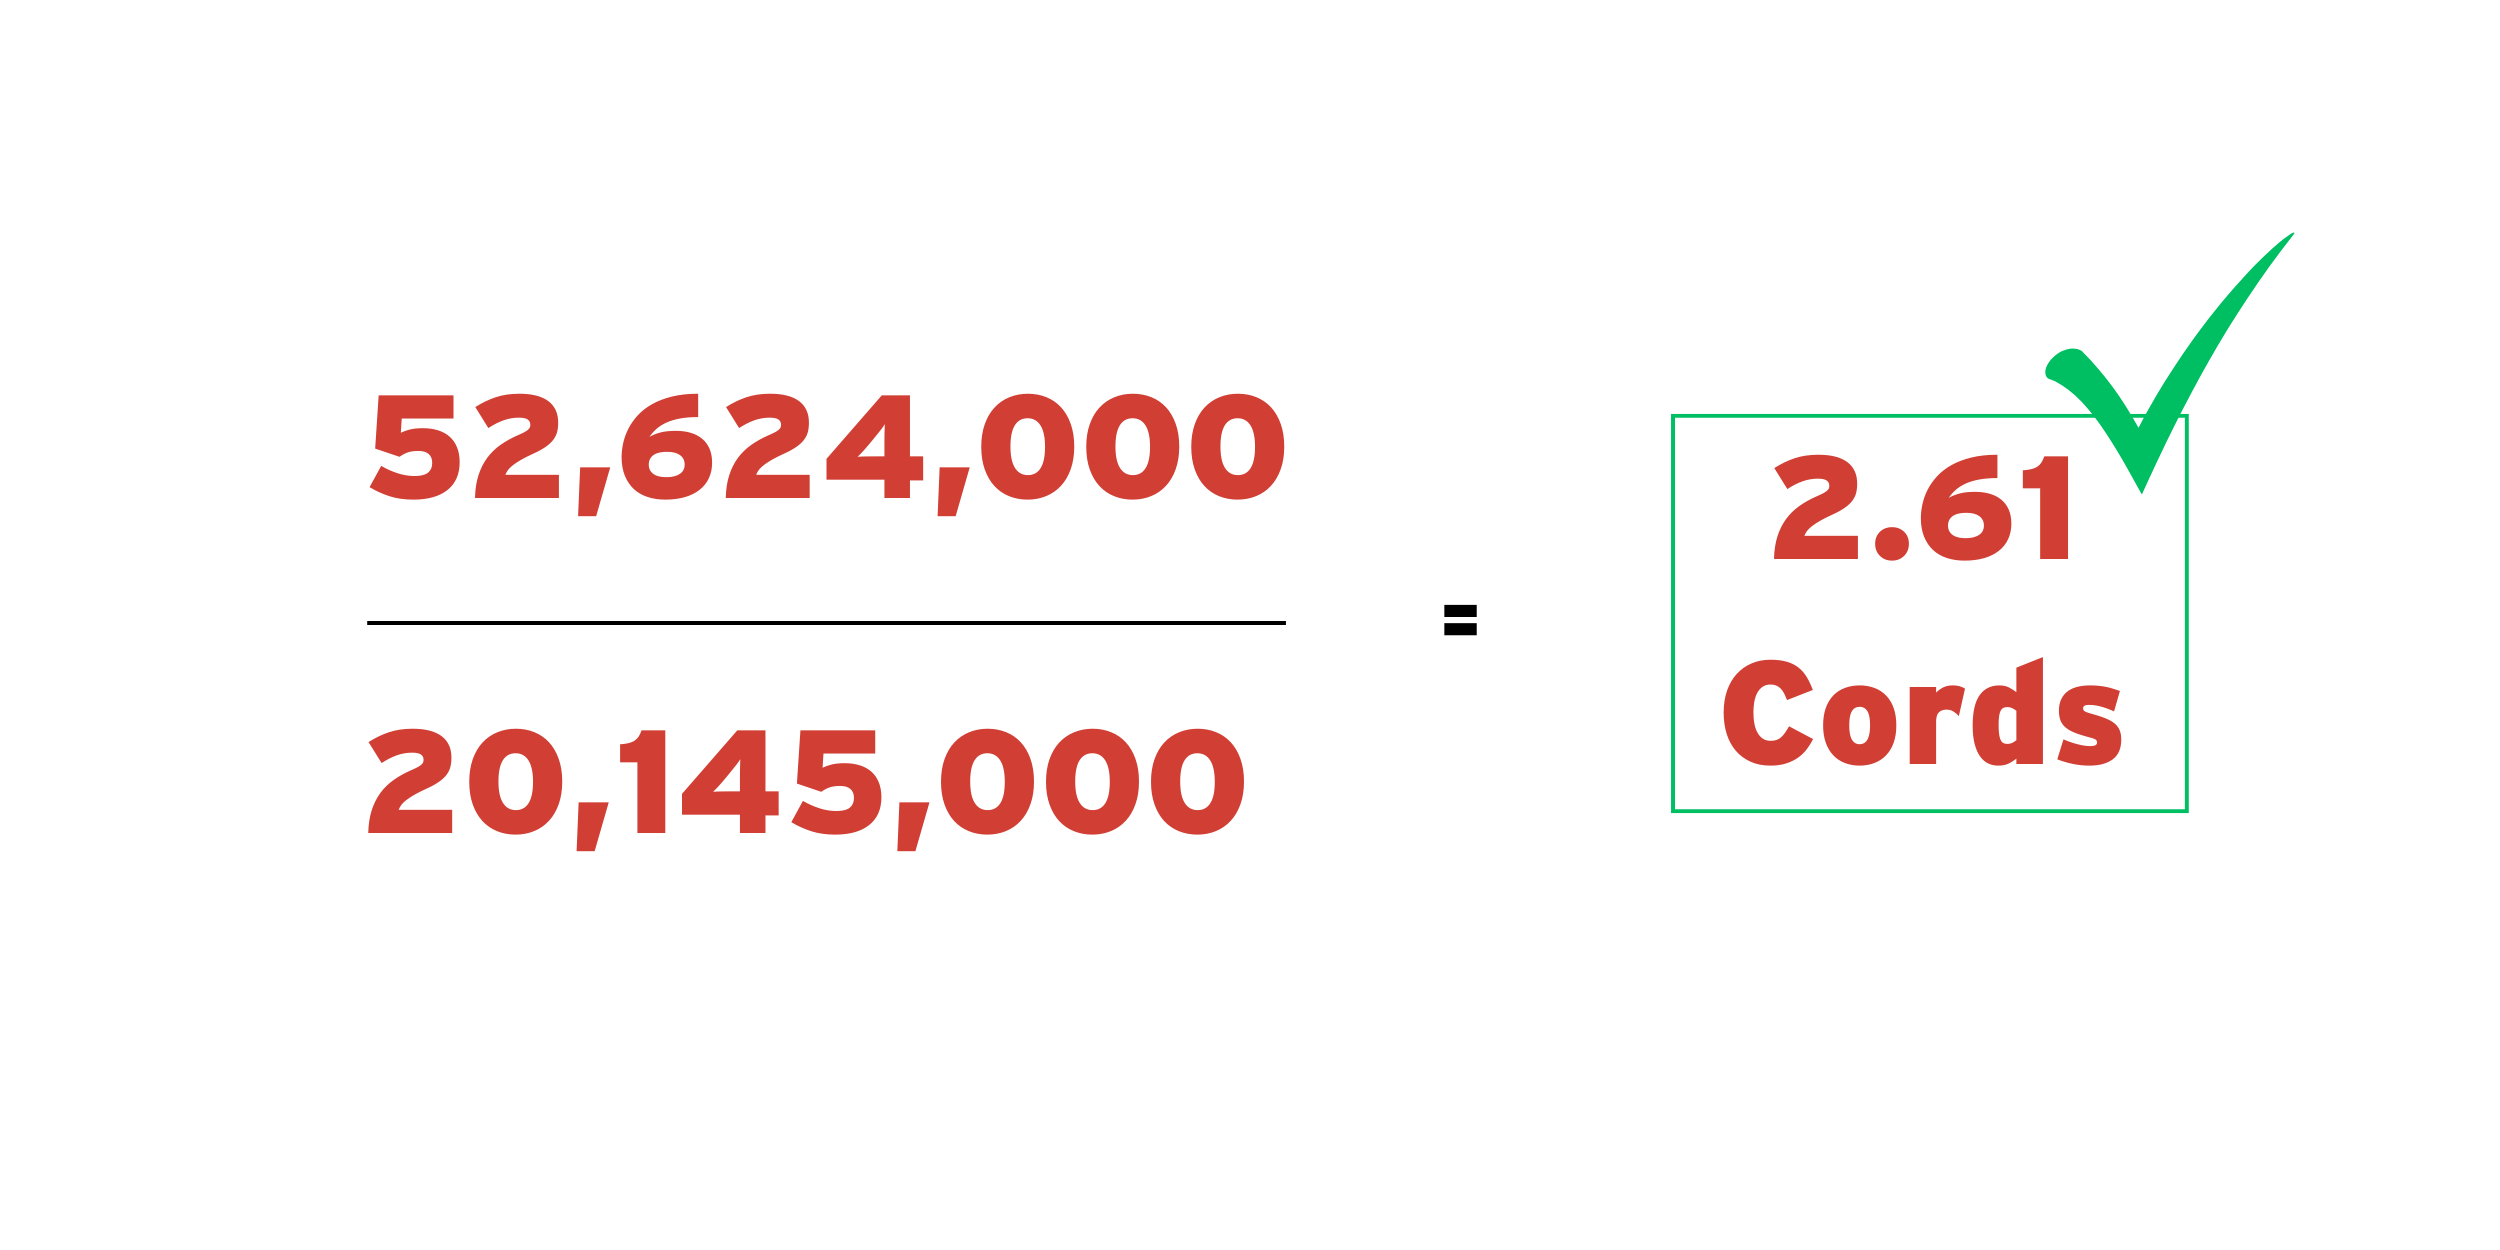 The formula for the number of cords needed in a wood heater with 52,624,000 in the numerator, 20,145,000 in the denominator, with the answer coming out to 2.61 cords.